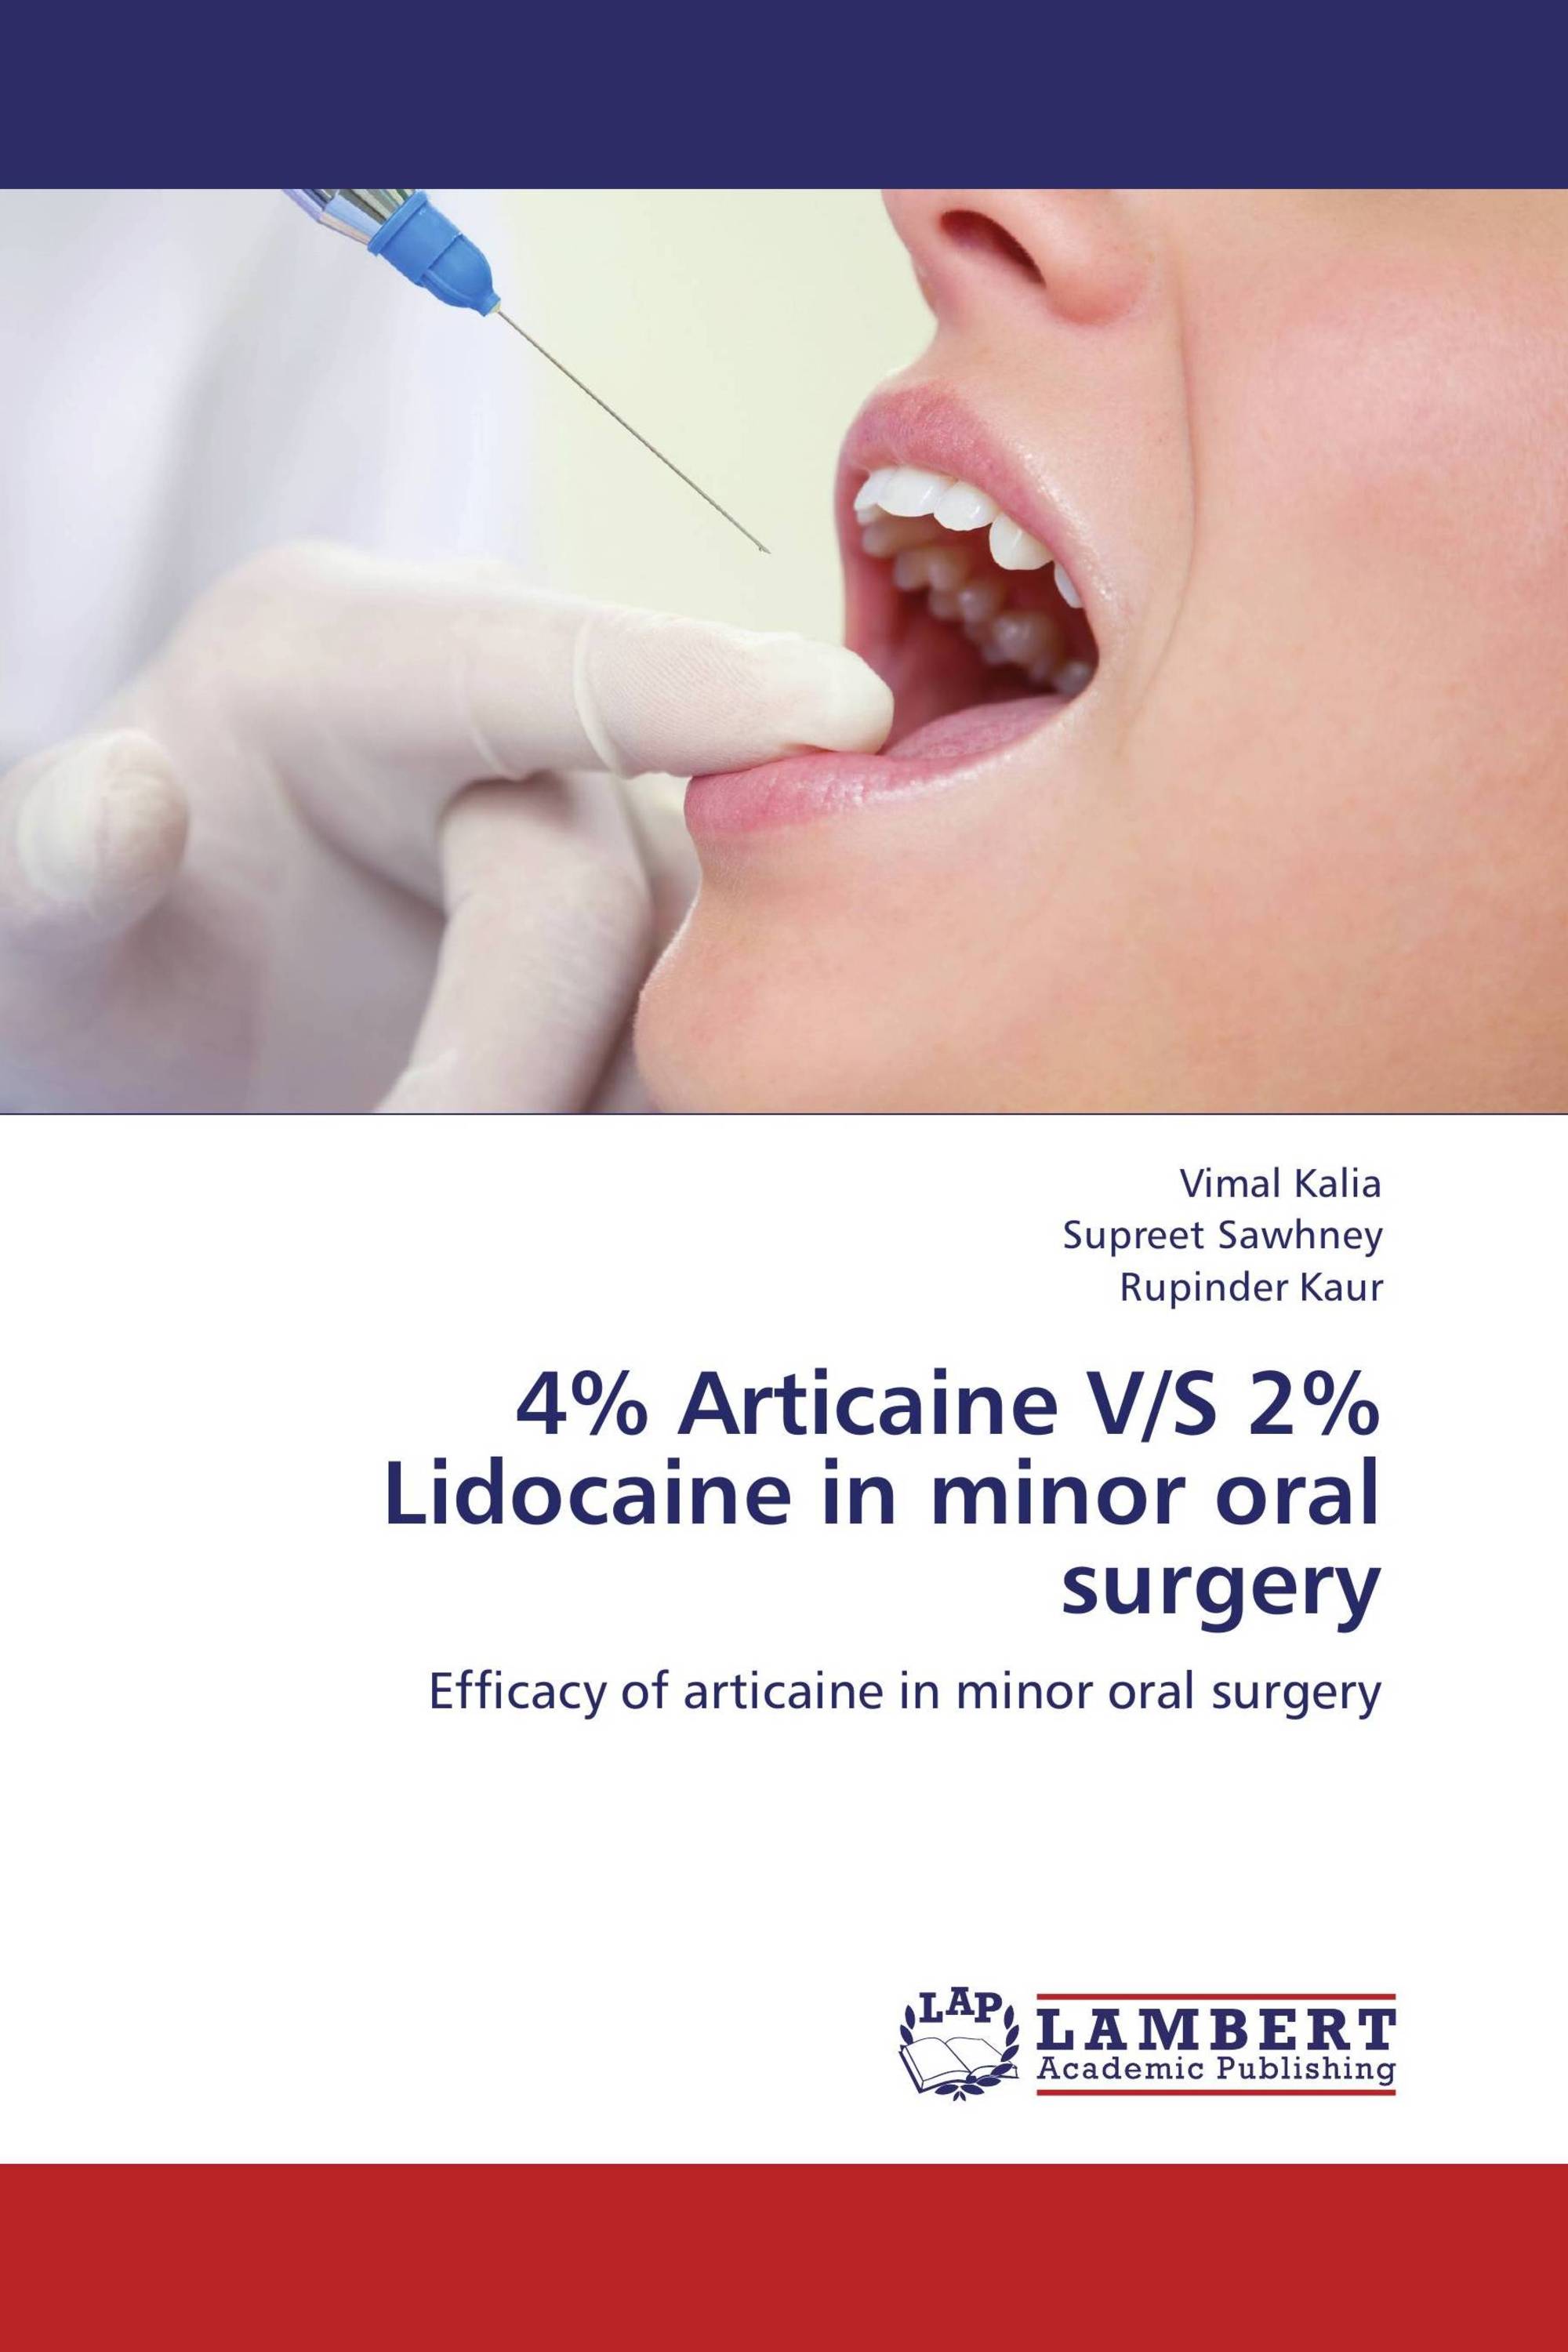 4% Articaine V/S 2% Lidocaine in minor oral surgery